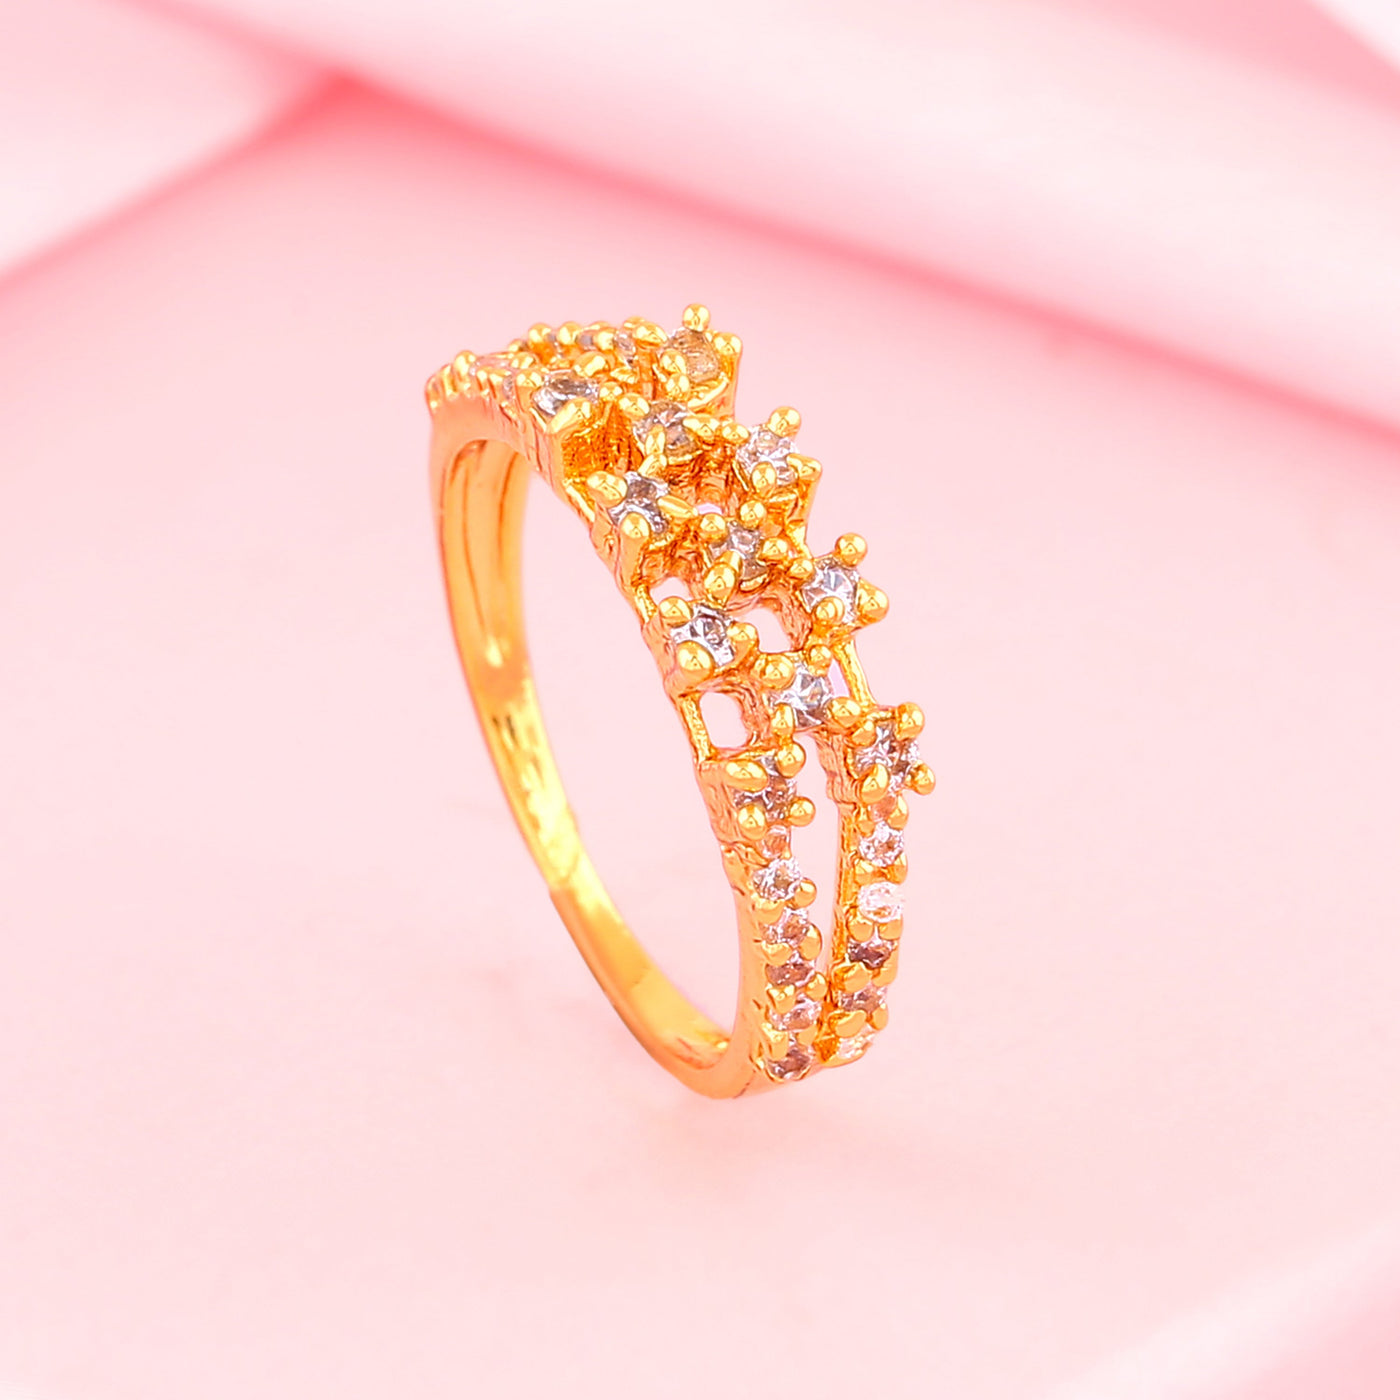 Estele Gold Plated CZ Exquisite Finger Ring for Women